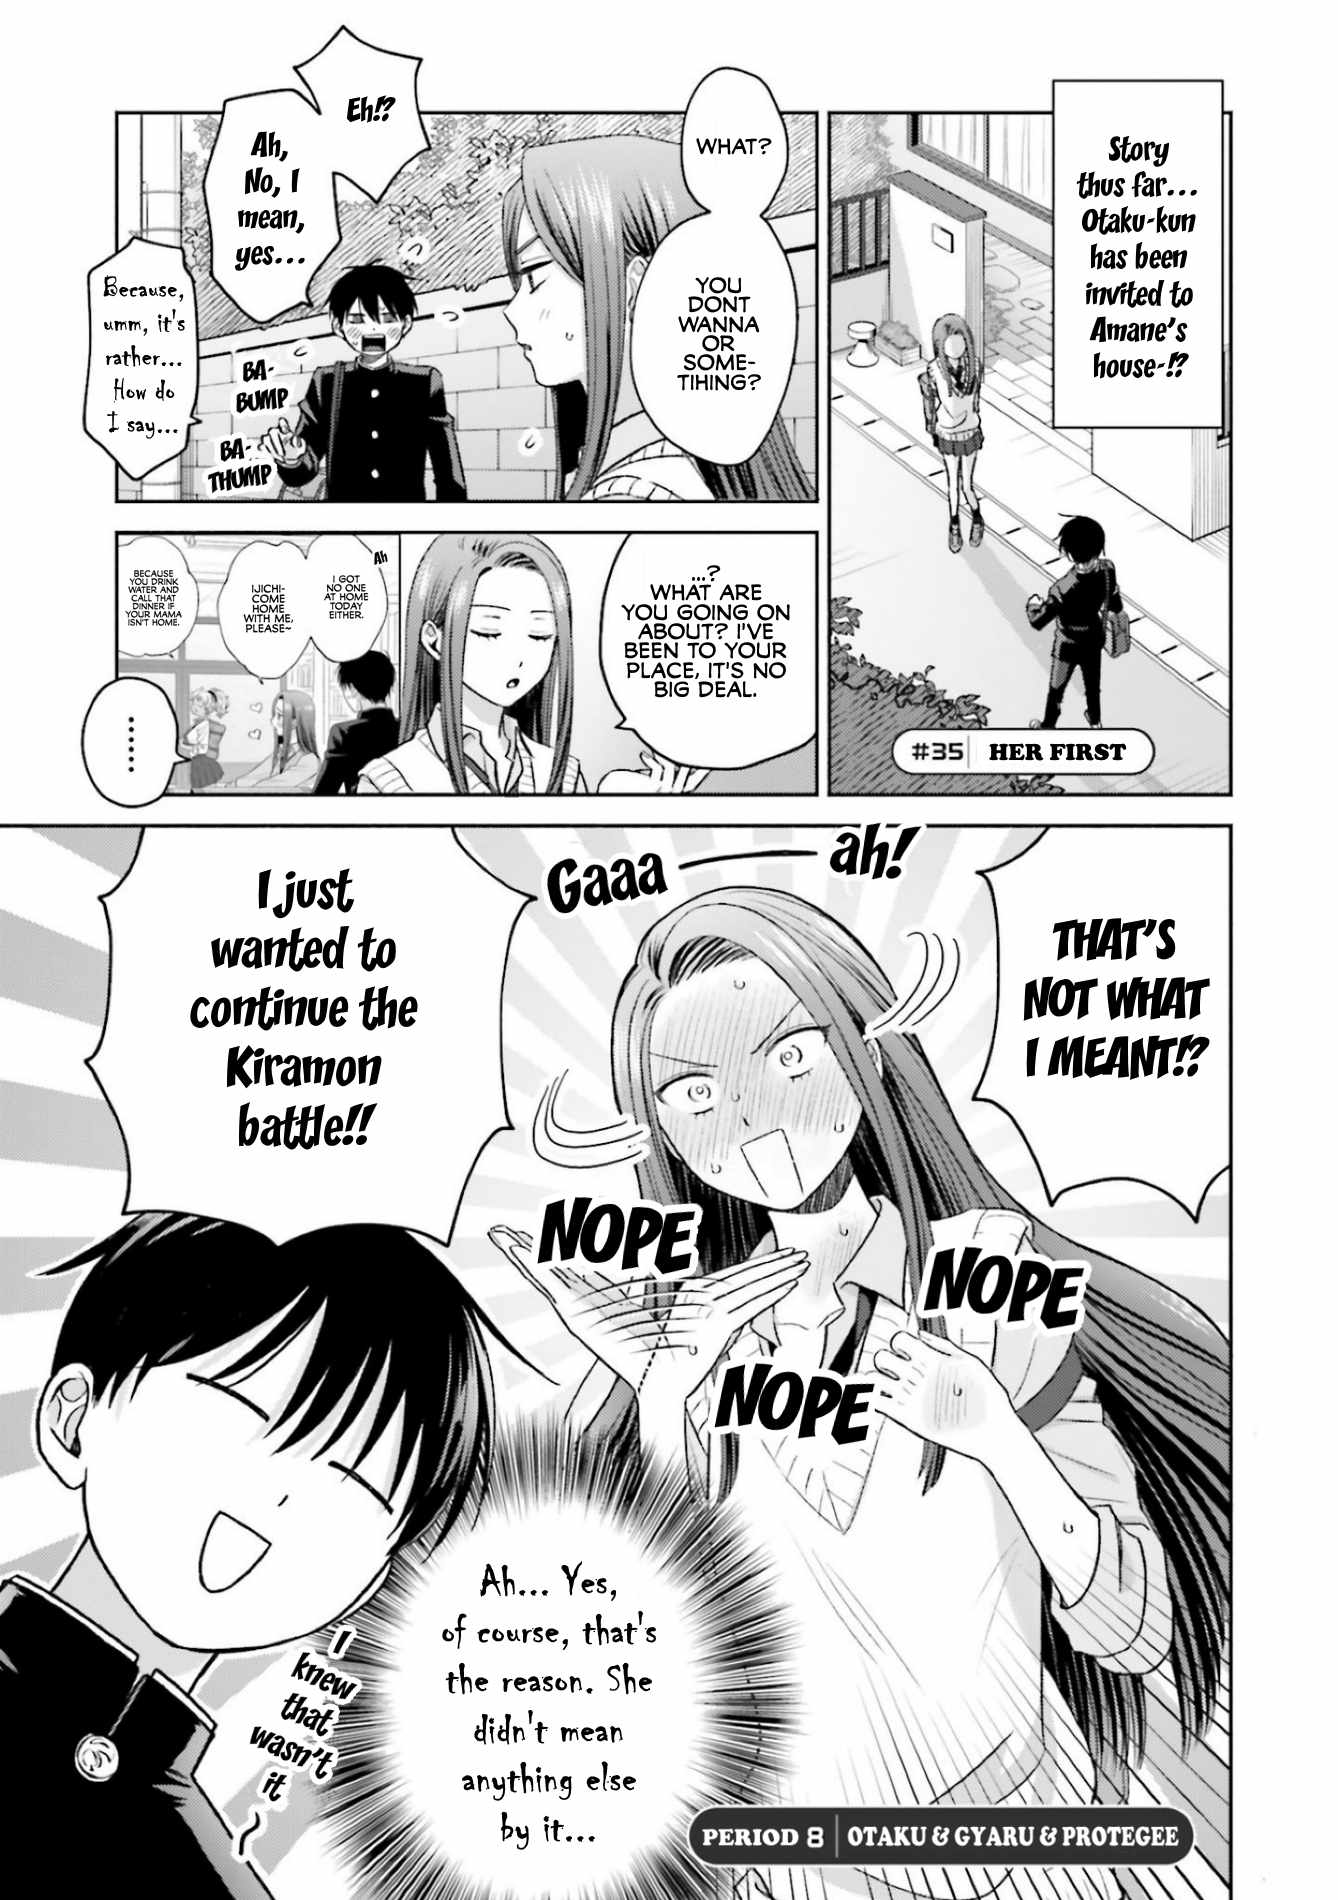 Gal Can't Be Kind to Otaku!? Chapter 8.1